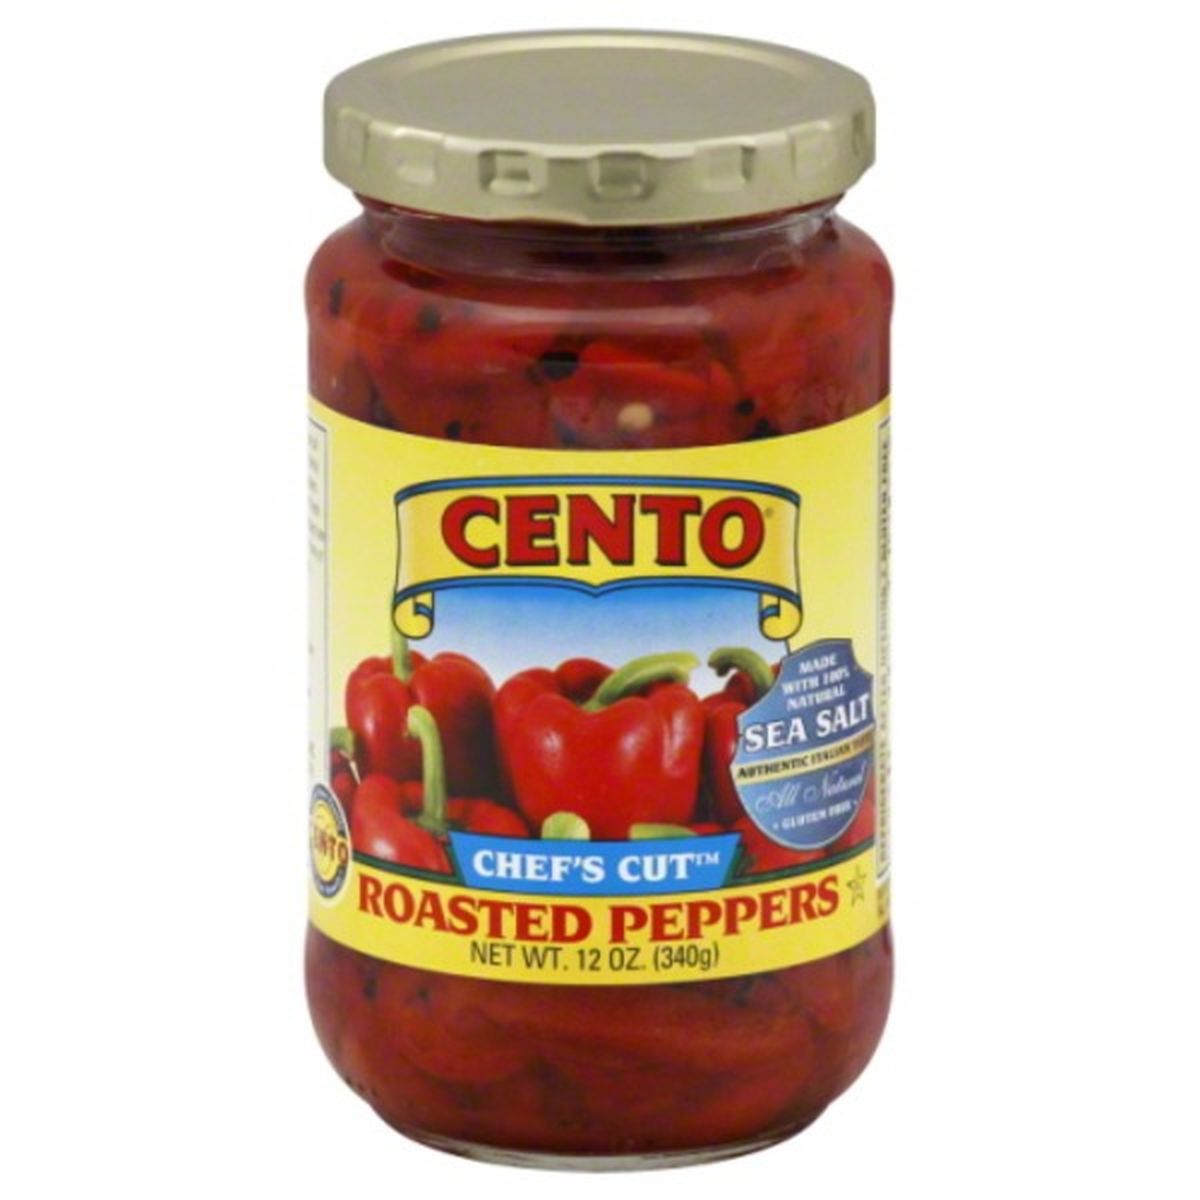 Calories in Cento Peppers, Roasted, Chef's Cut